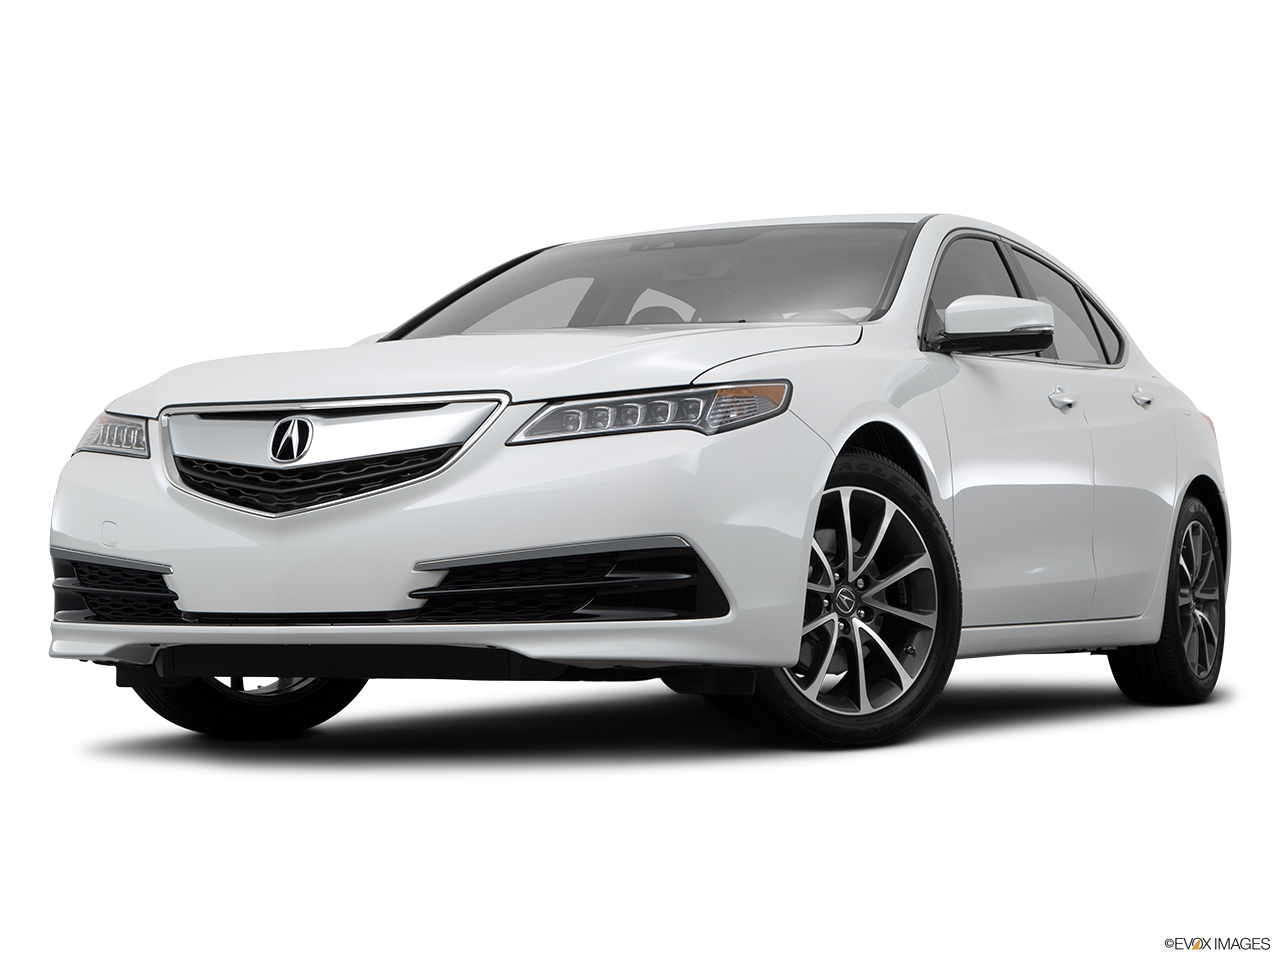 2015 Acura TLX 3.5 V-6 9-AT SH-AWD Front angle view, low wide perspective. 